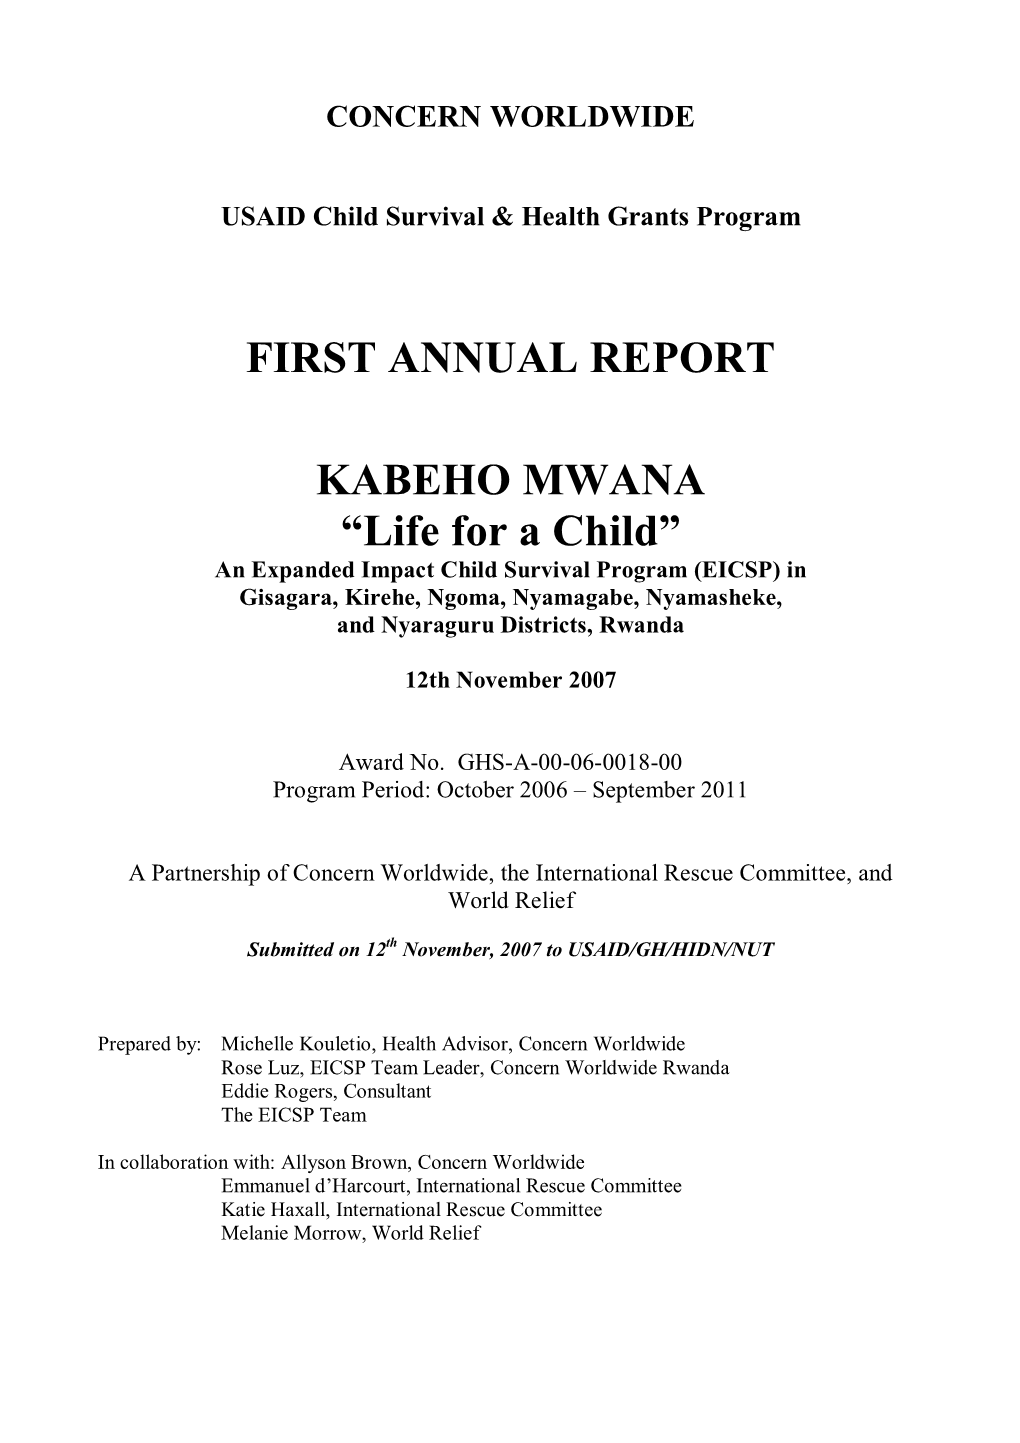 FIRST ANNUAL REPORT KABEHO MWANA “Life for a Child”